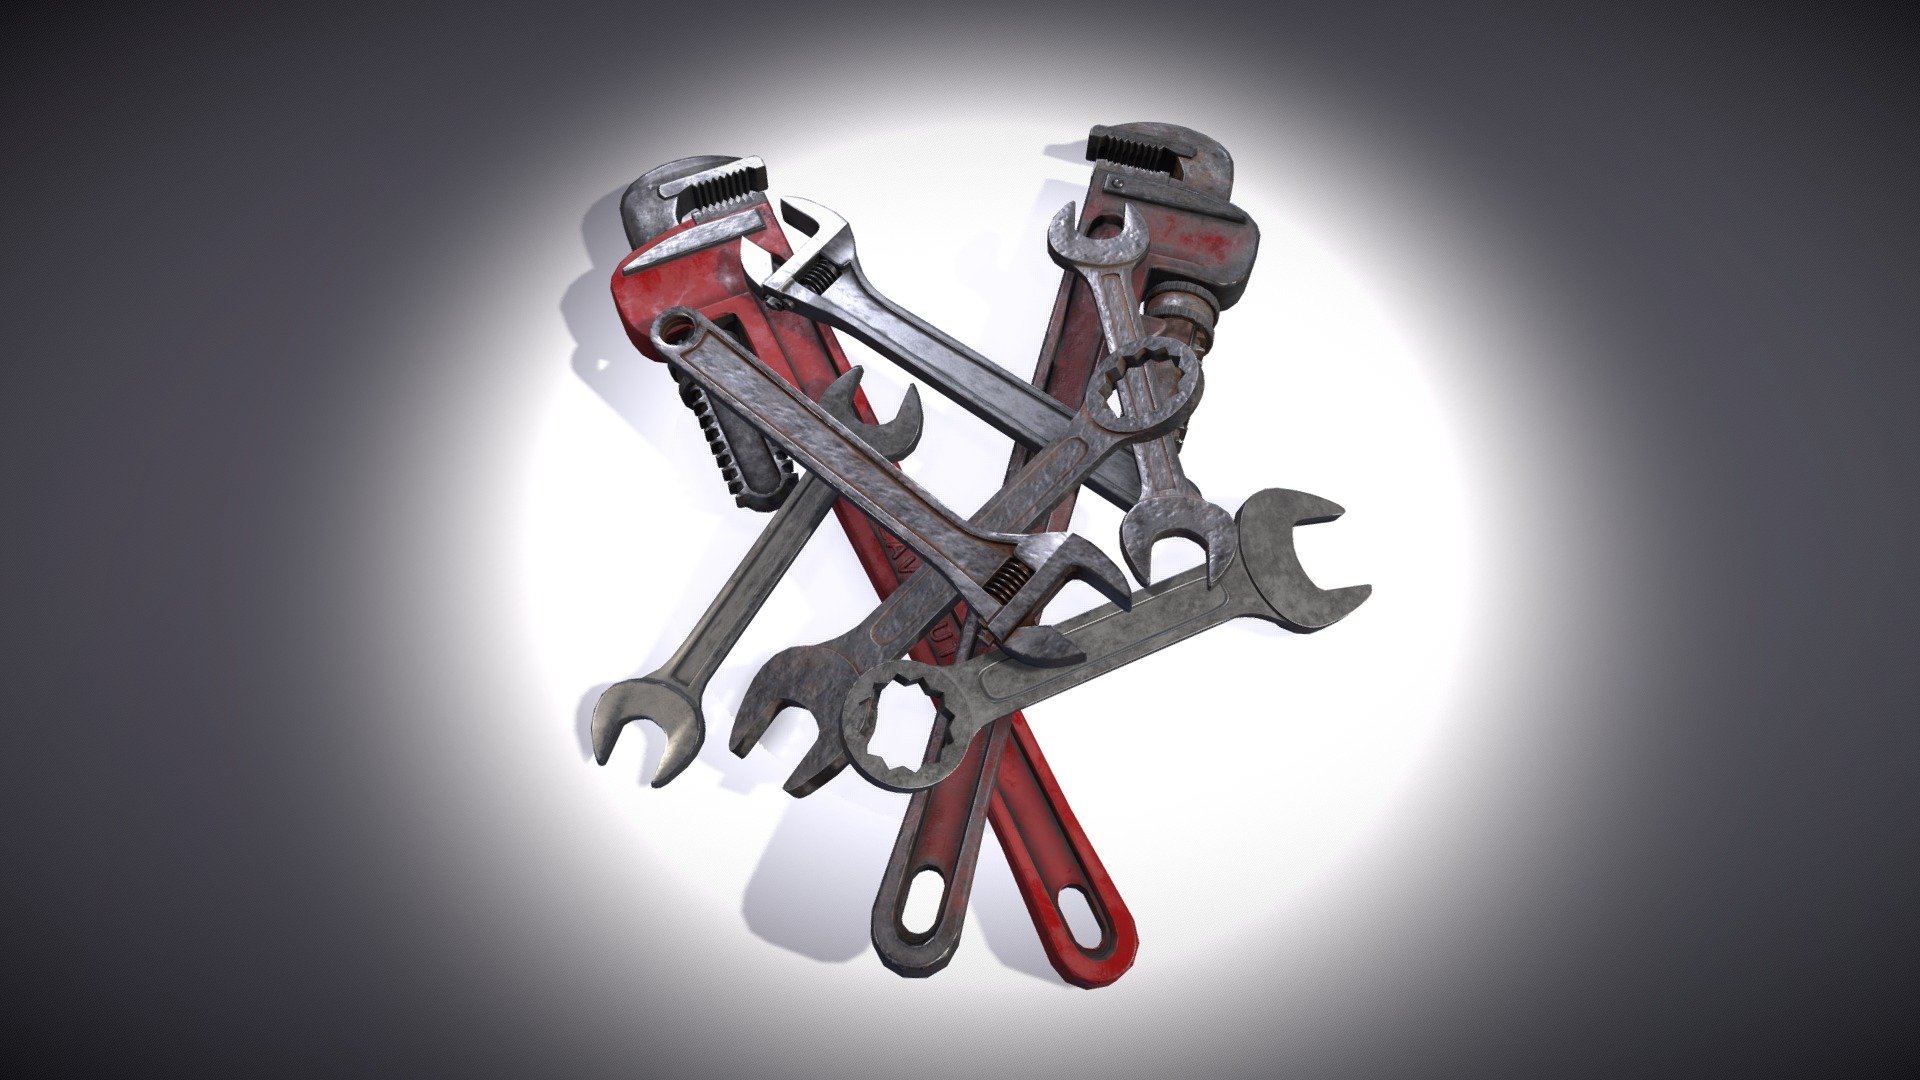 Collection of Spanners/Wrenches - Includes Clean/Used and Dirty/Dilapidated variant texture set.


2k PBR Textures • Albedo • Metalness • Roughness • Normal • AO


Additional file contains .fbx of each asset centered and all textures 3d model